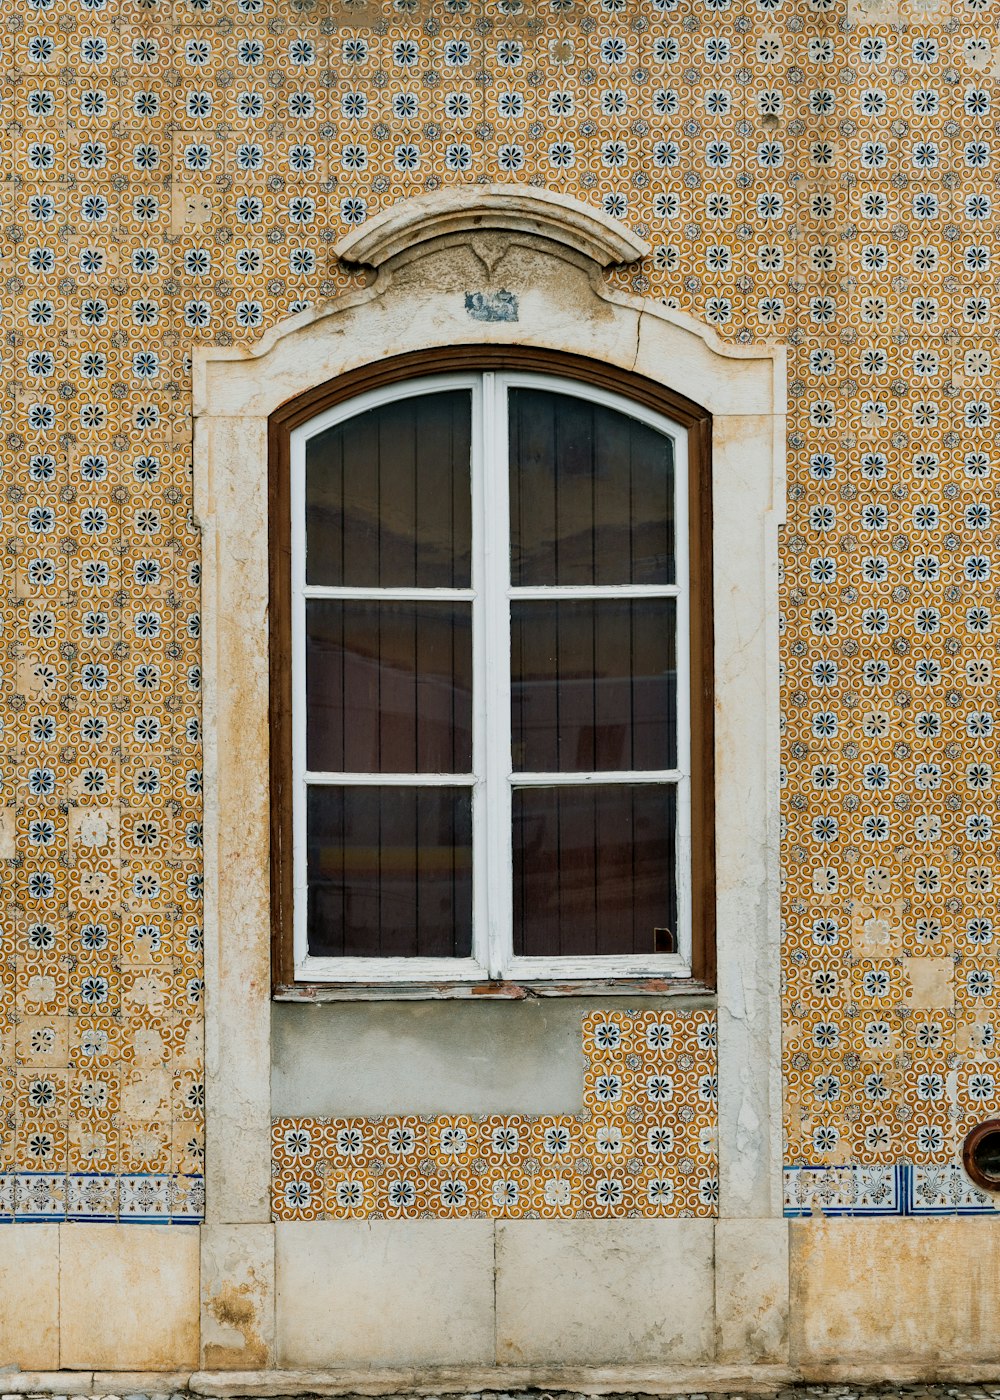 a window on a wall with a tiled pattern